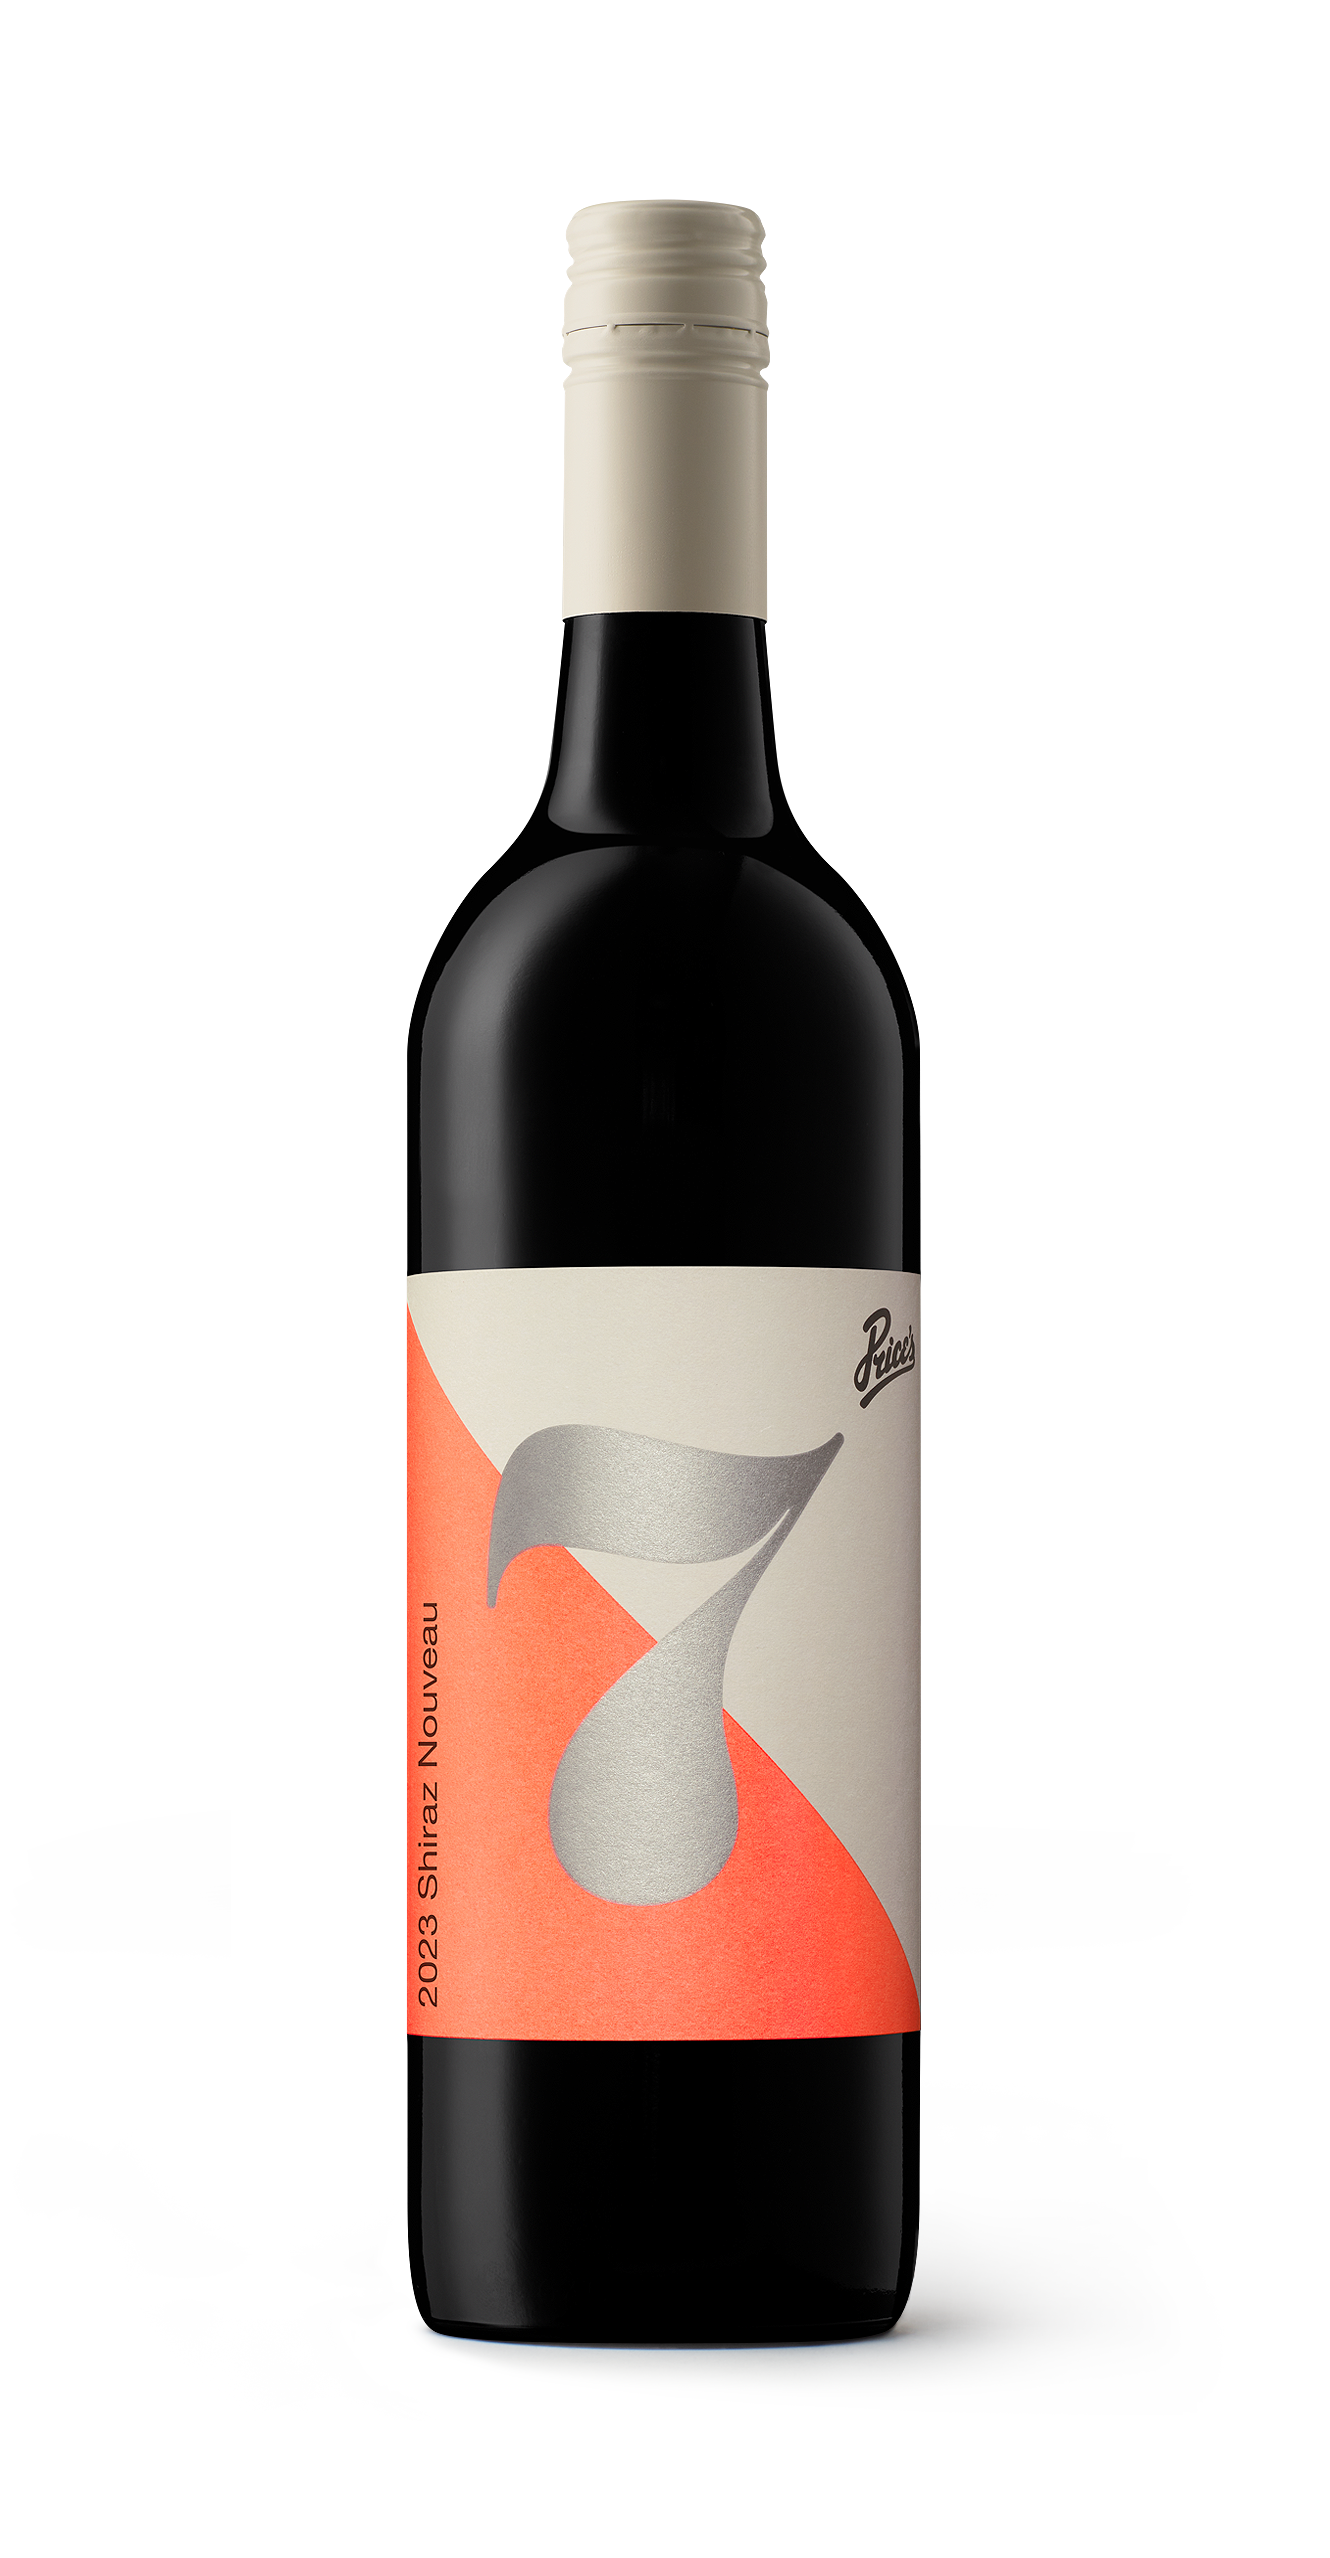 Bottle of 2023 Block 7 Shiraz Nouveau featuring an abstract coral and grey label design.